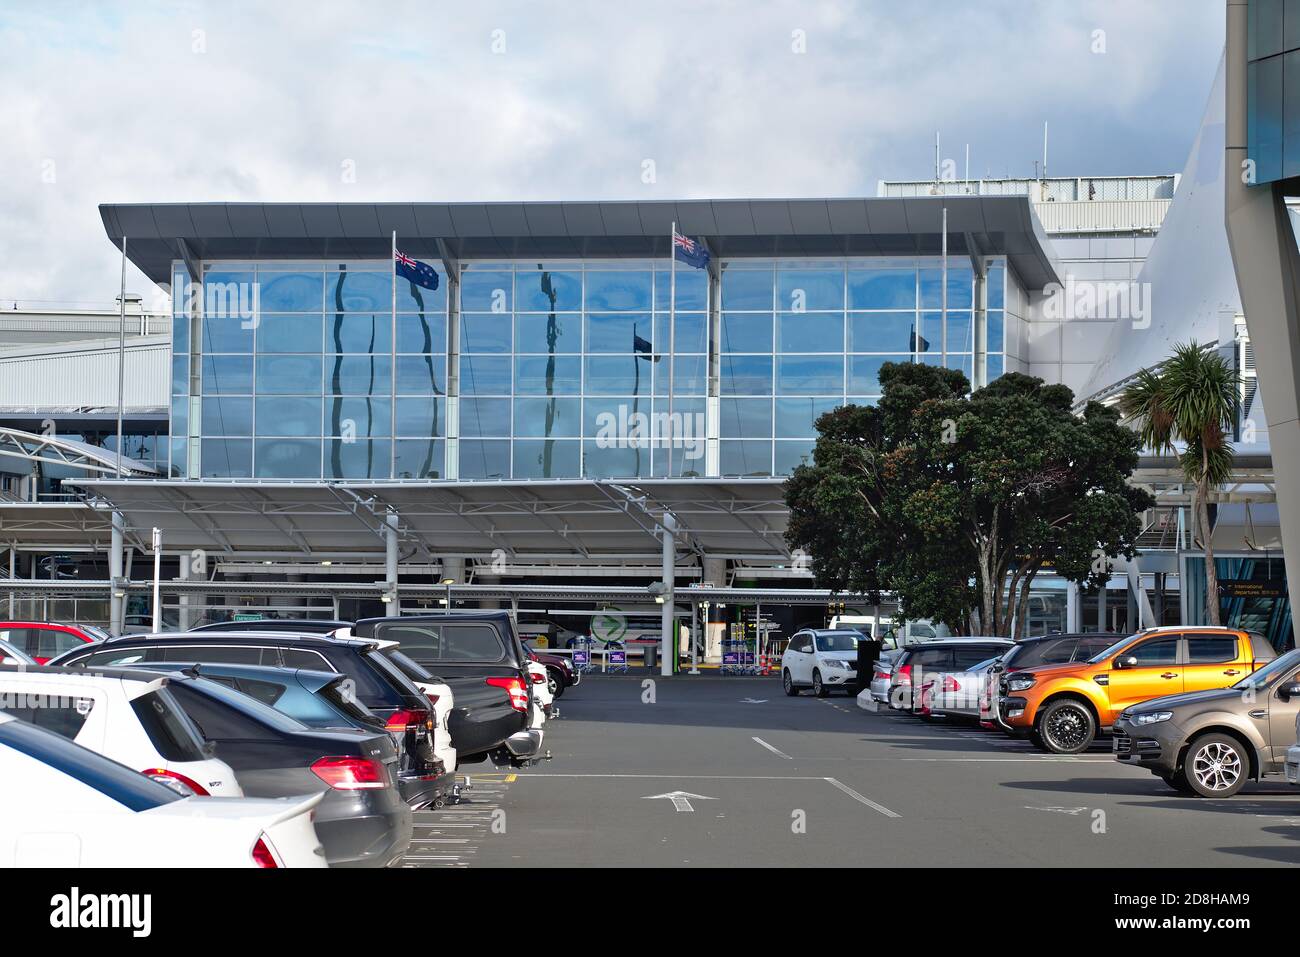 AUCKLAND, NEW ZEALAND - Jul 01, 2019: View of Auckland International Airport building from car park Stock Photo